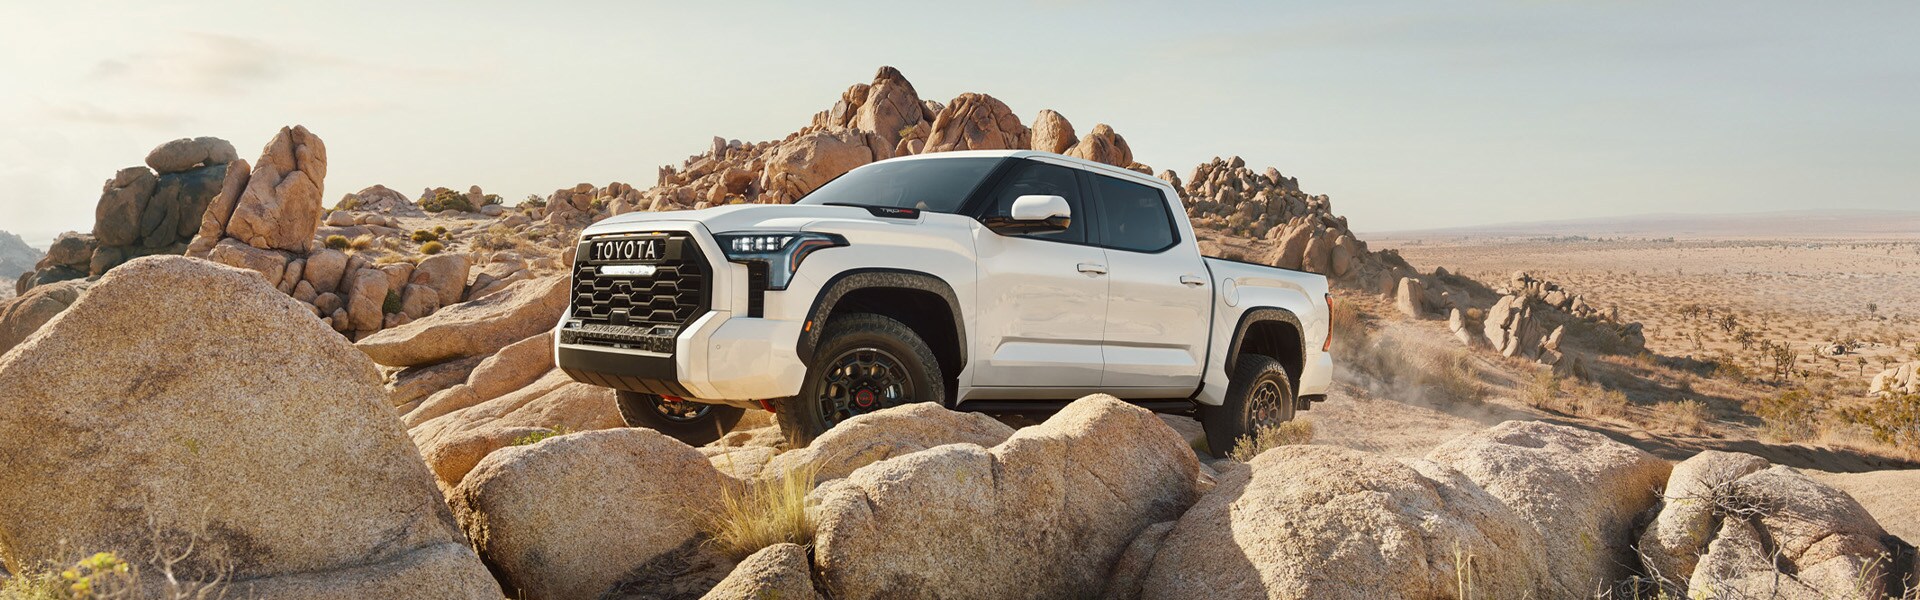 The All-New 2022 Toyota Tundra at Bobby Rahal Toyota in Mechanicsburg, PA | White 2022 Toyota Tundra TRD Pro Off-Roading on Rock Formation